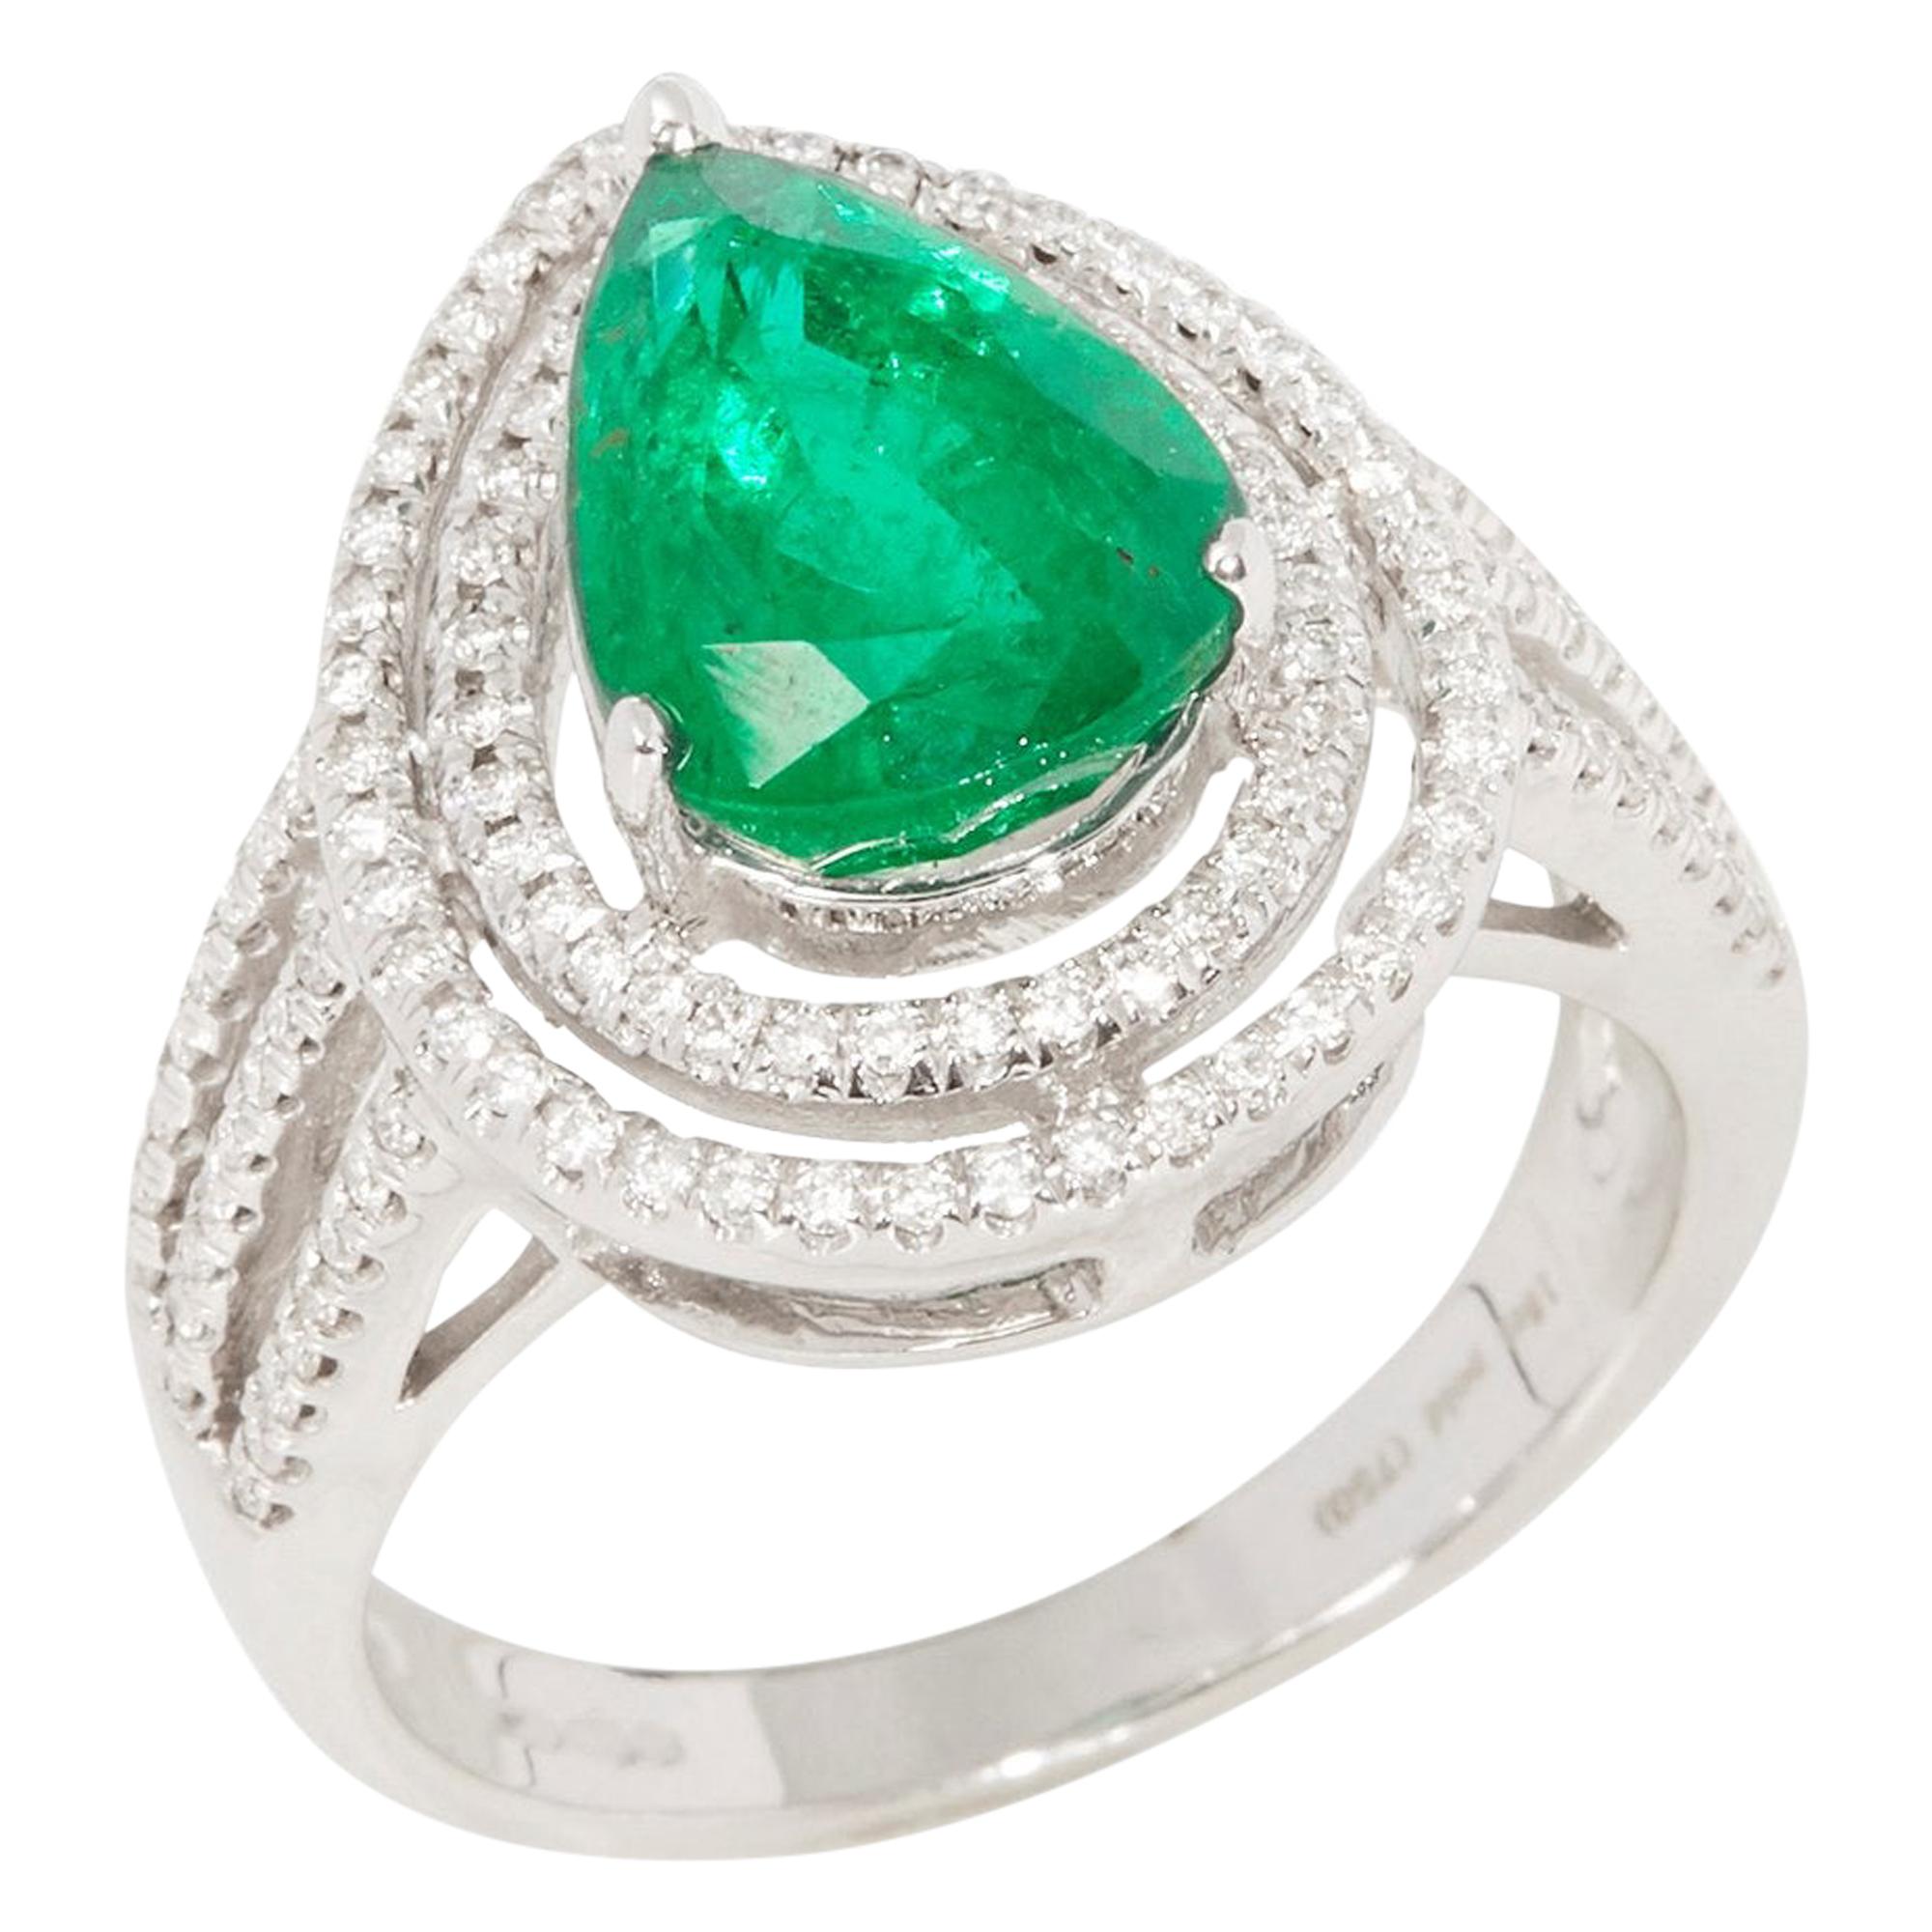 Certified 3.68ct Untreated Zambian Pear Cut Emerald and Diamond 18k gold Ring